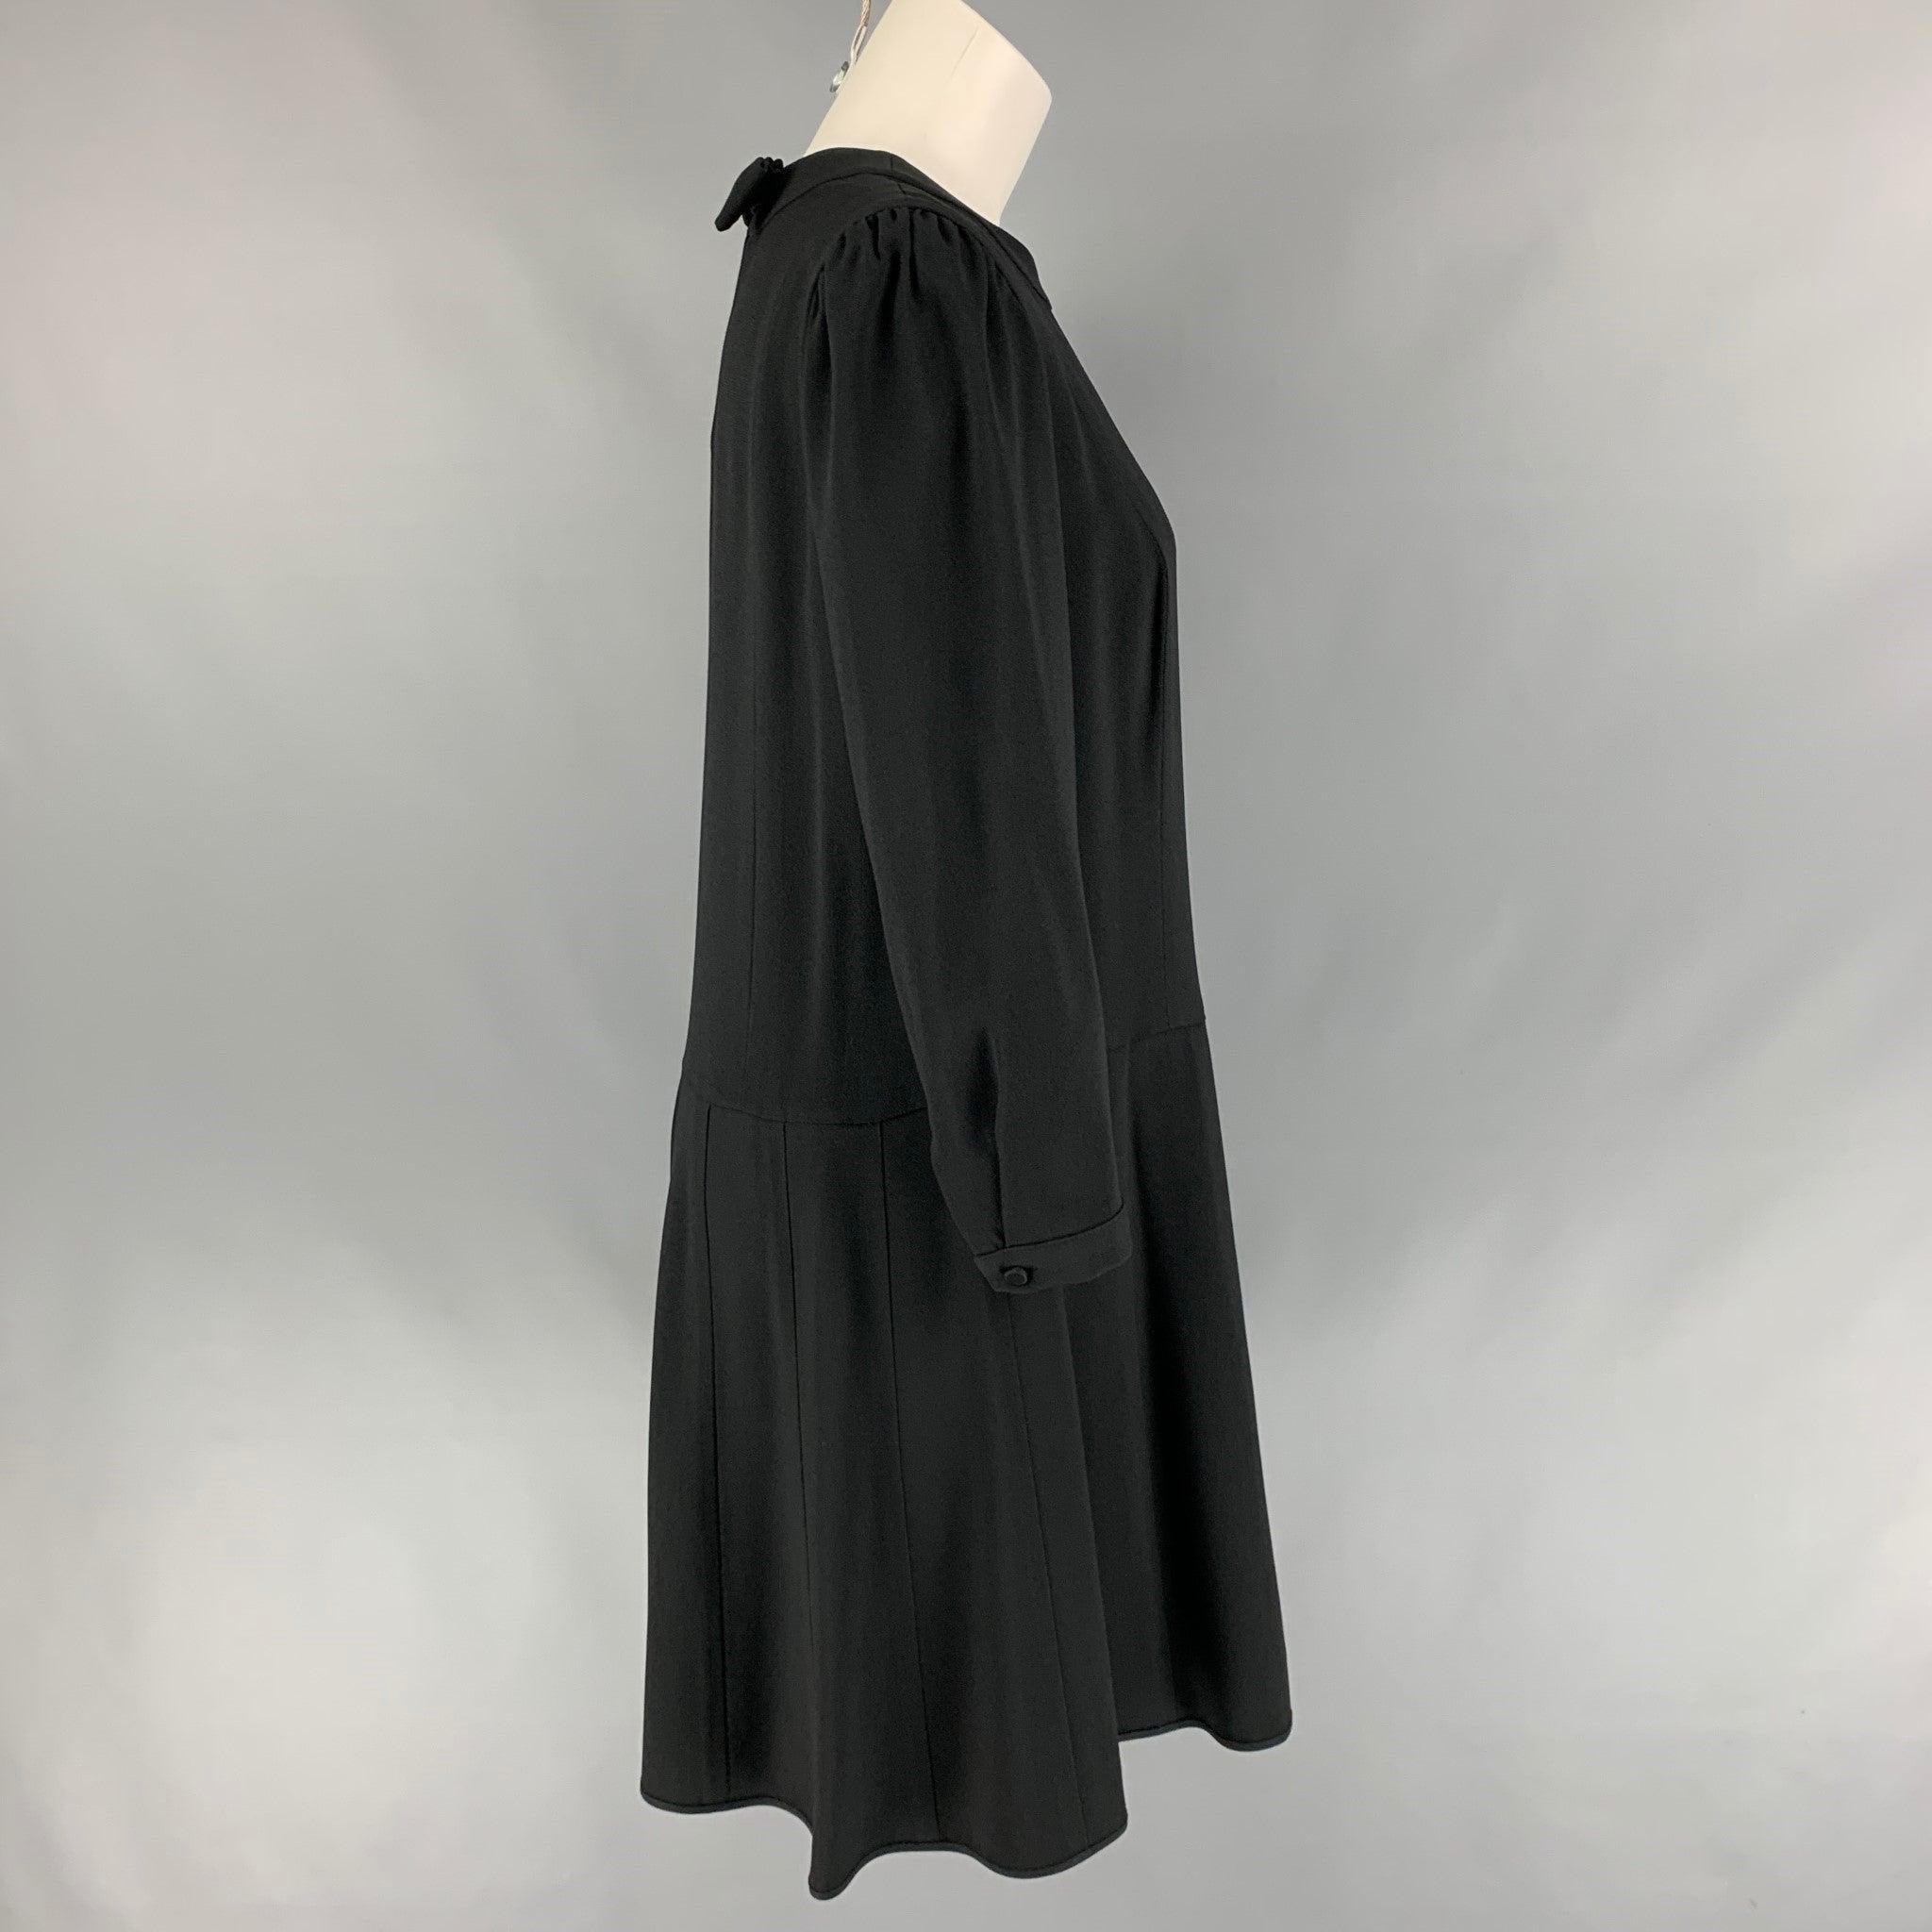 MARC JACOBS RUNWAY Size 6 Black Acetate / Viscose A-Line Dress In Good Condition For Sale In San Francisco, CA